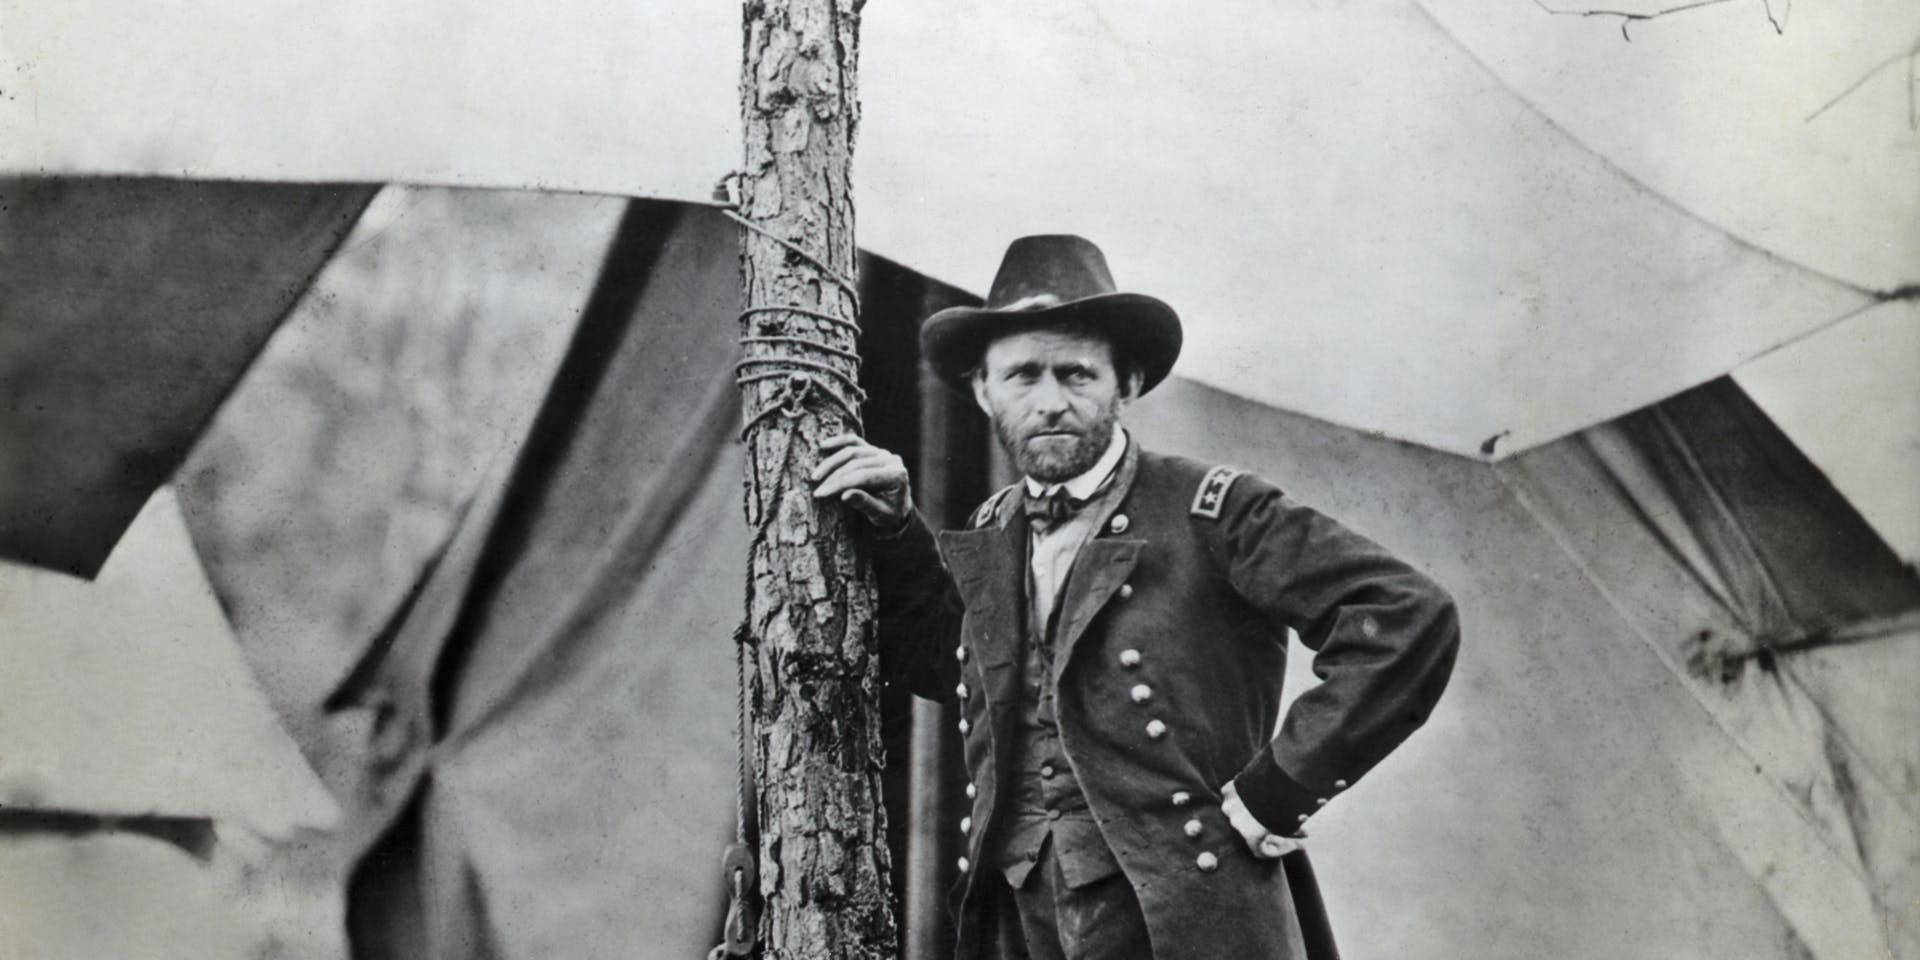 Gen. Ulysses S. Grant's pending promotion sheds new light on his overlooked fight for equal rights after the Civil War